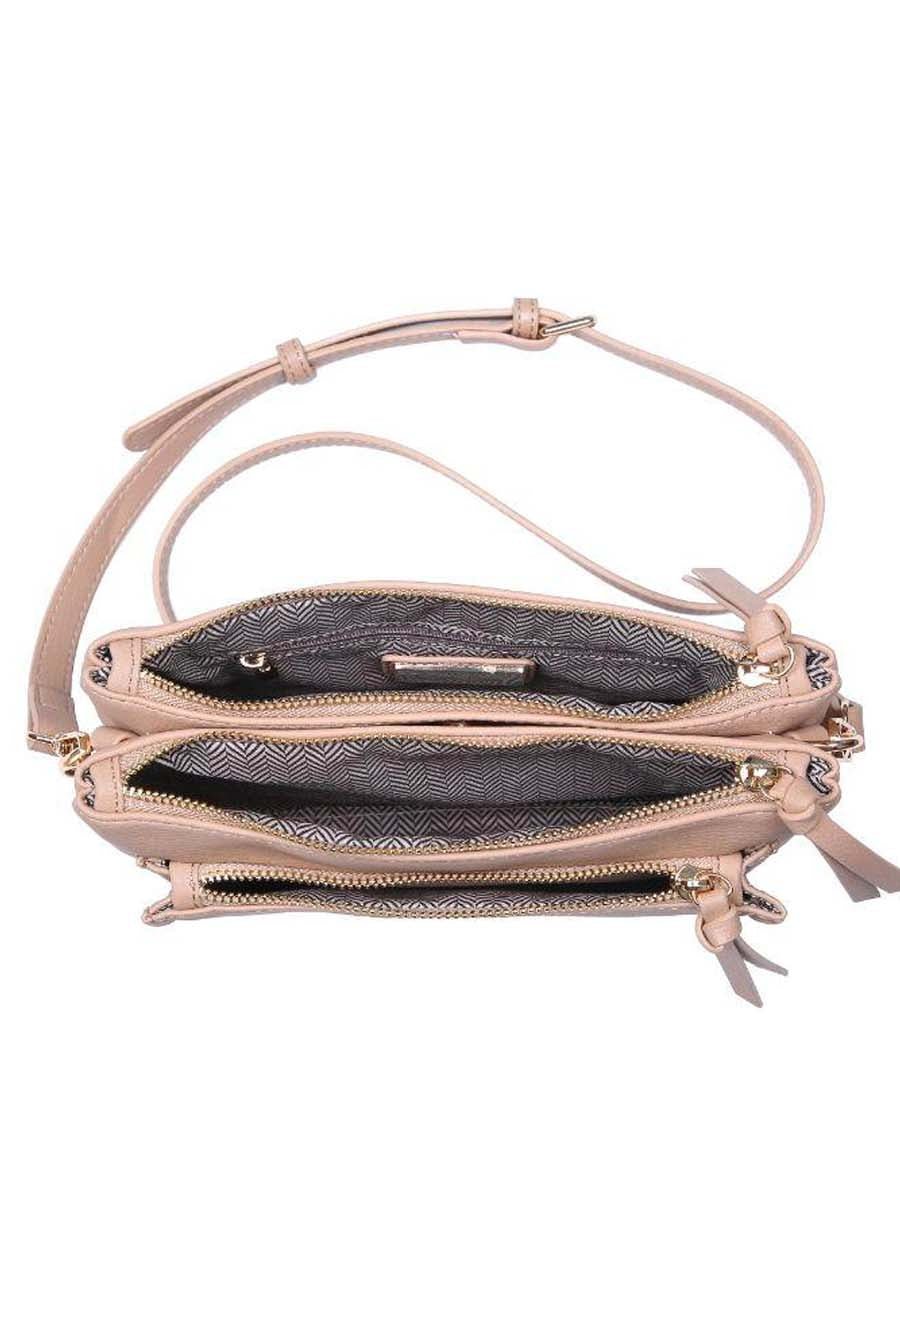 'Kenzie' Crossbody Purse - Purses and Bags - The Green Brick Boutique